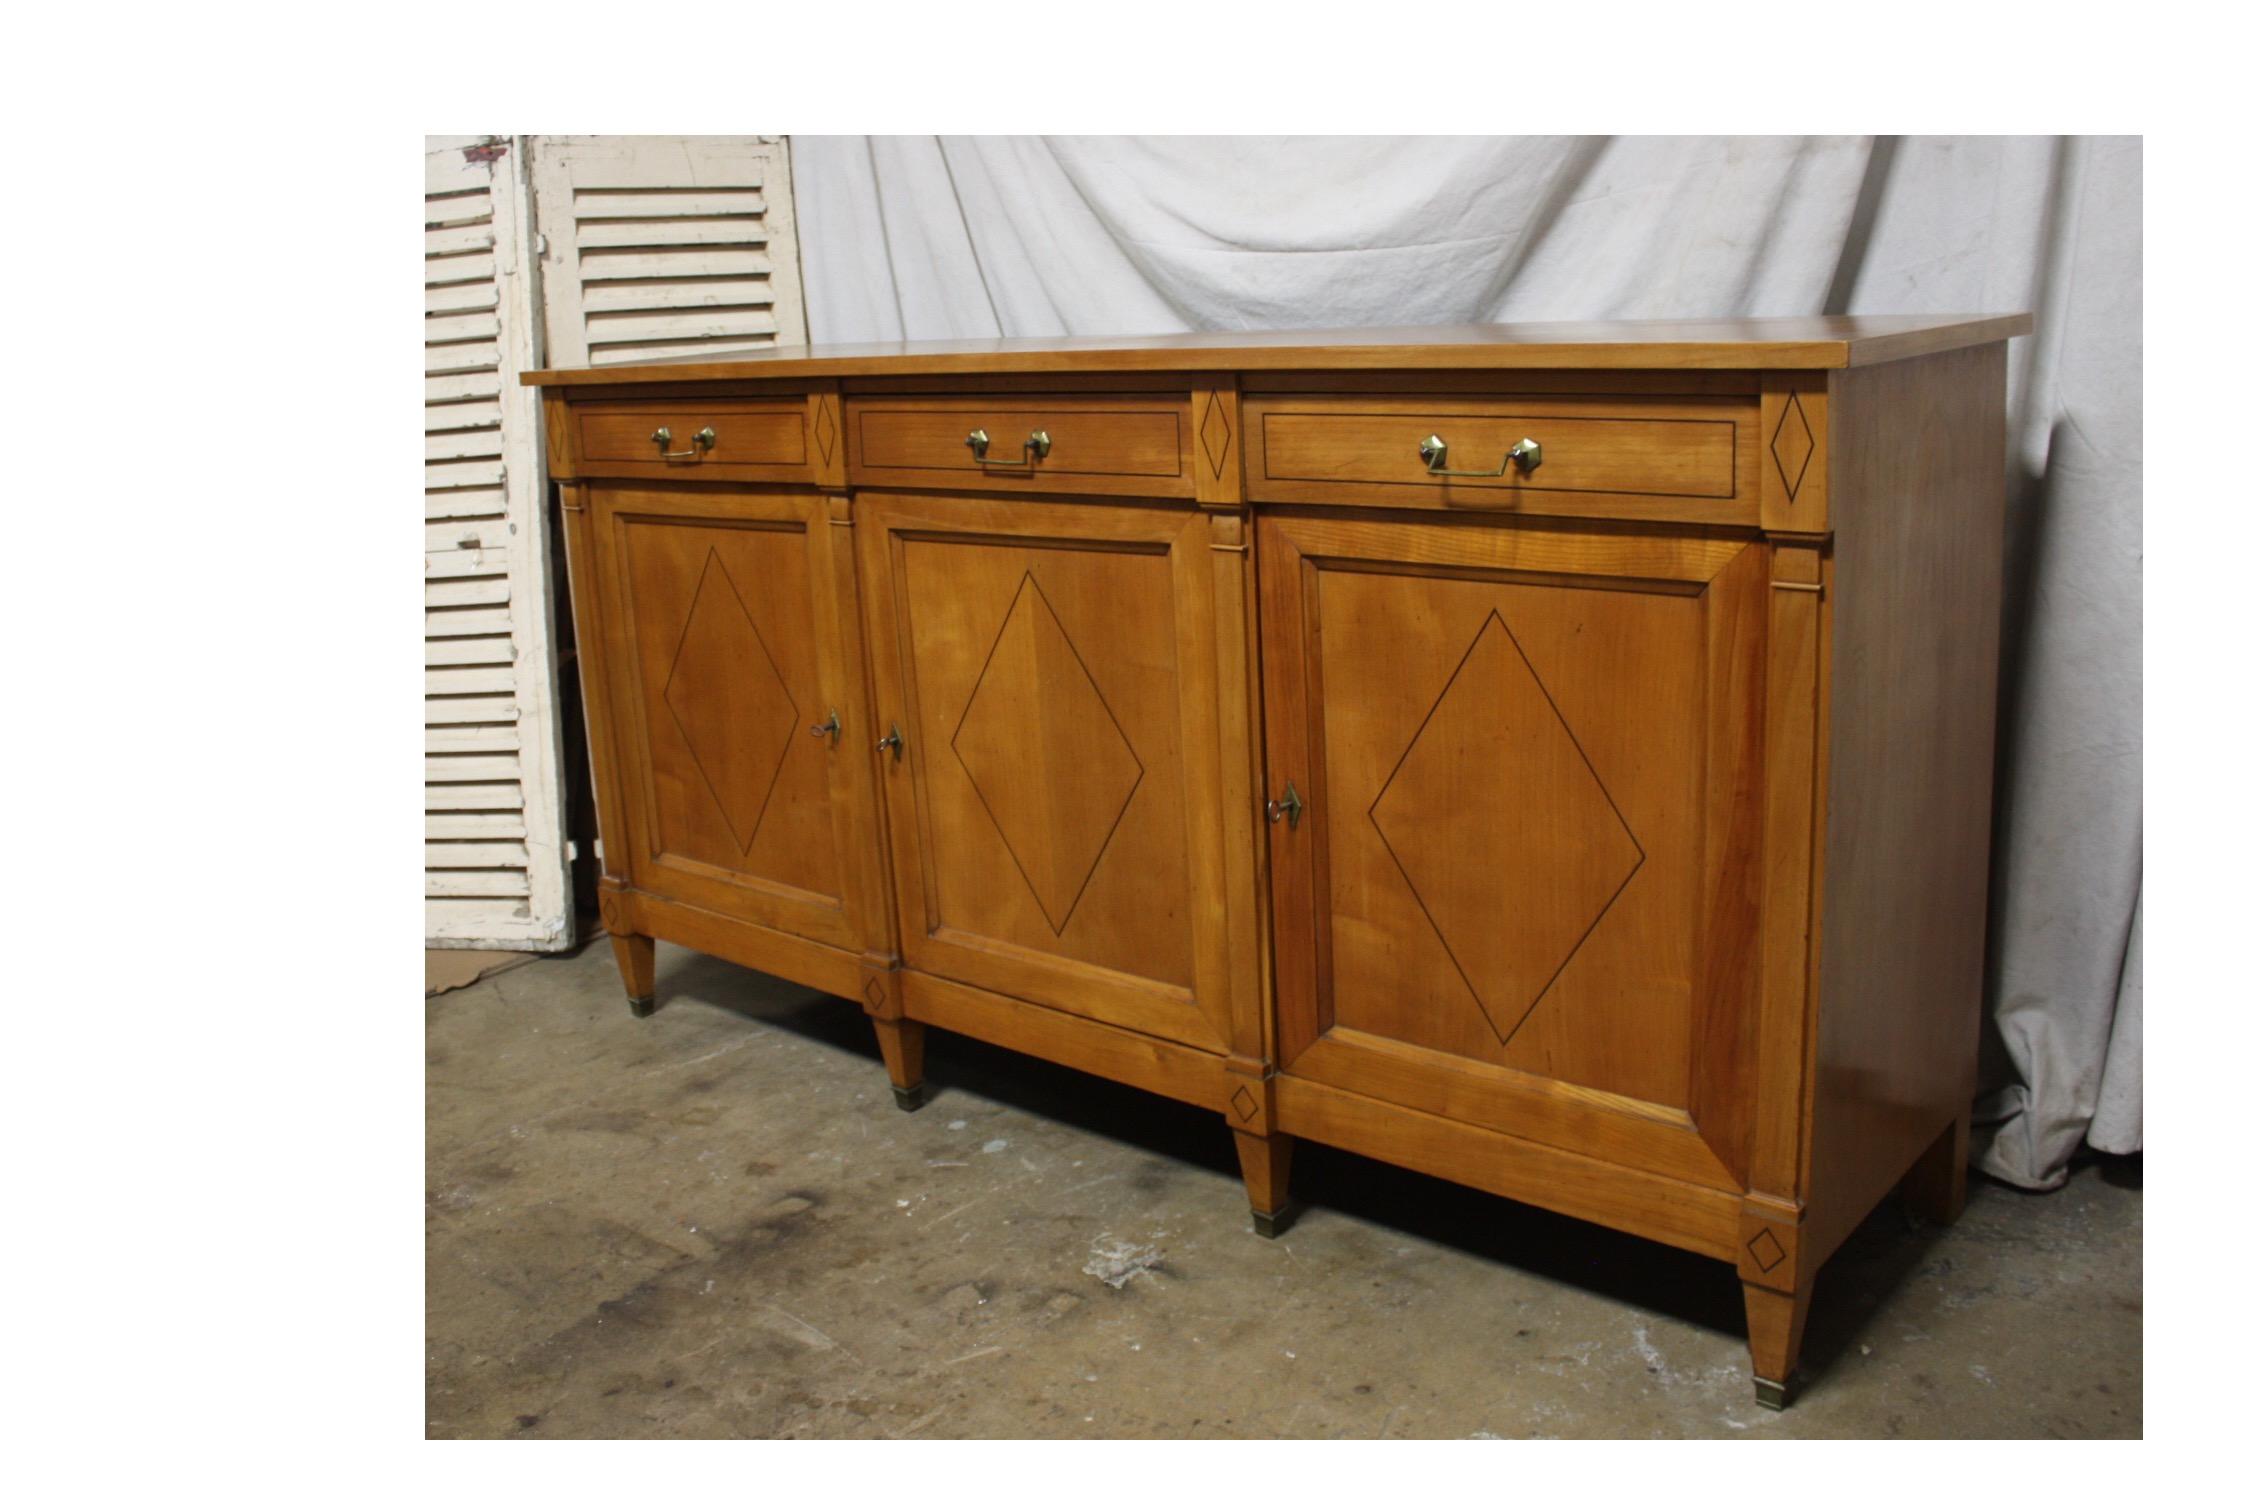 Early 20th century French Directoire sideboard.